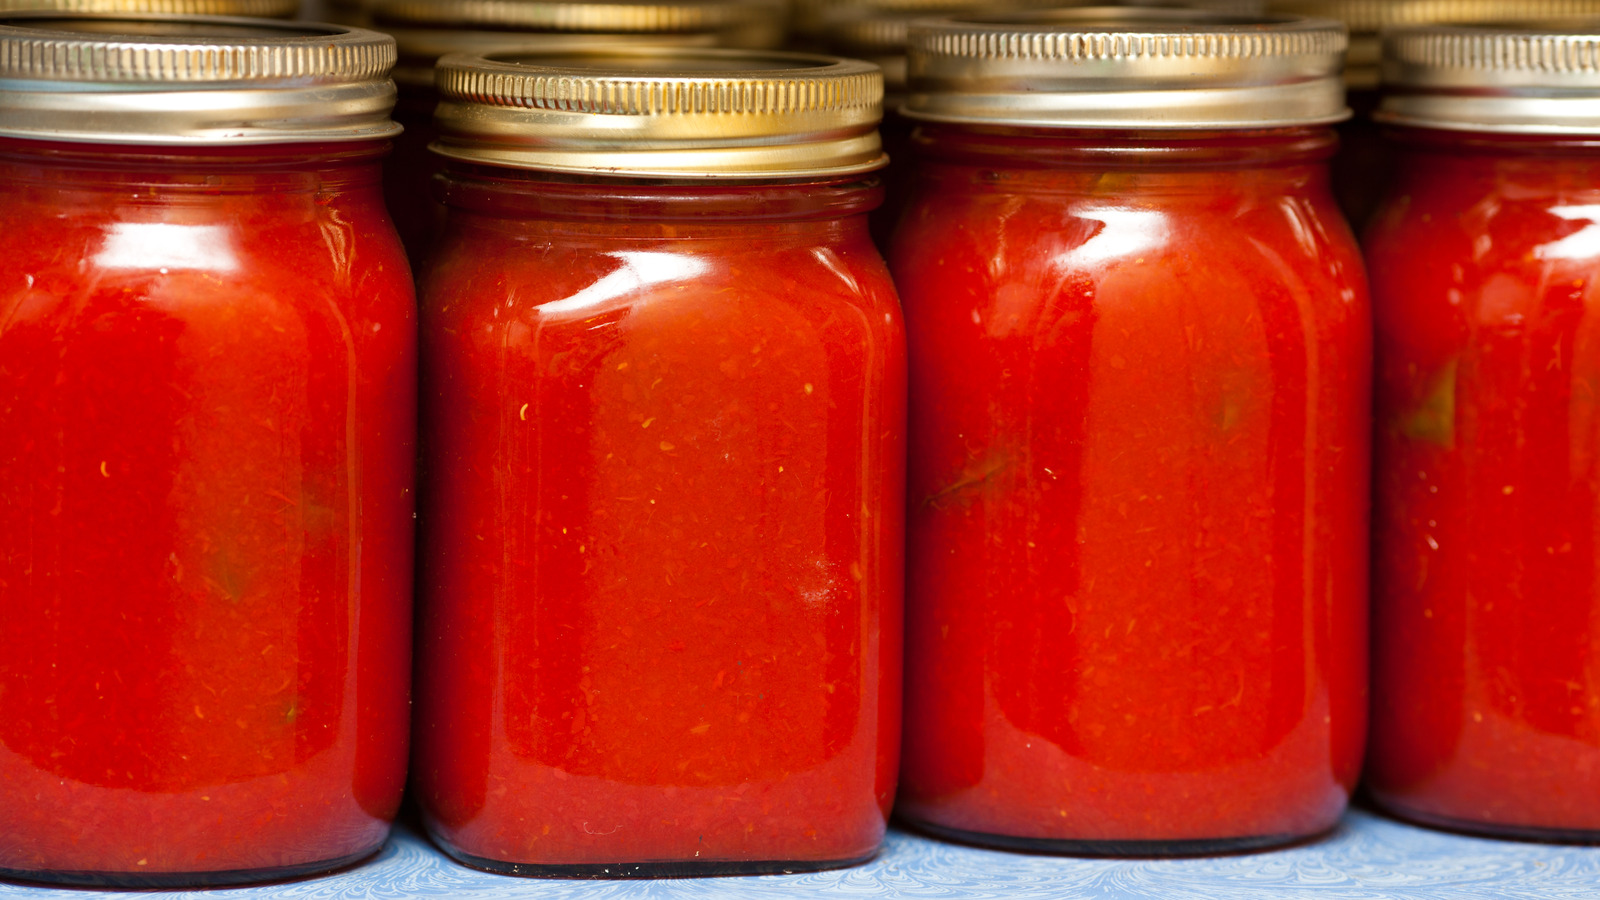 How Long Can Opened Pasta Sauce Stay in the Fridge